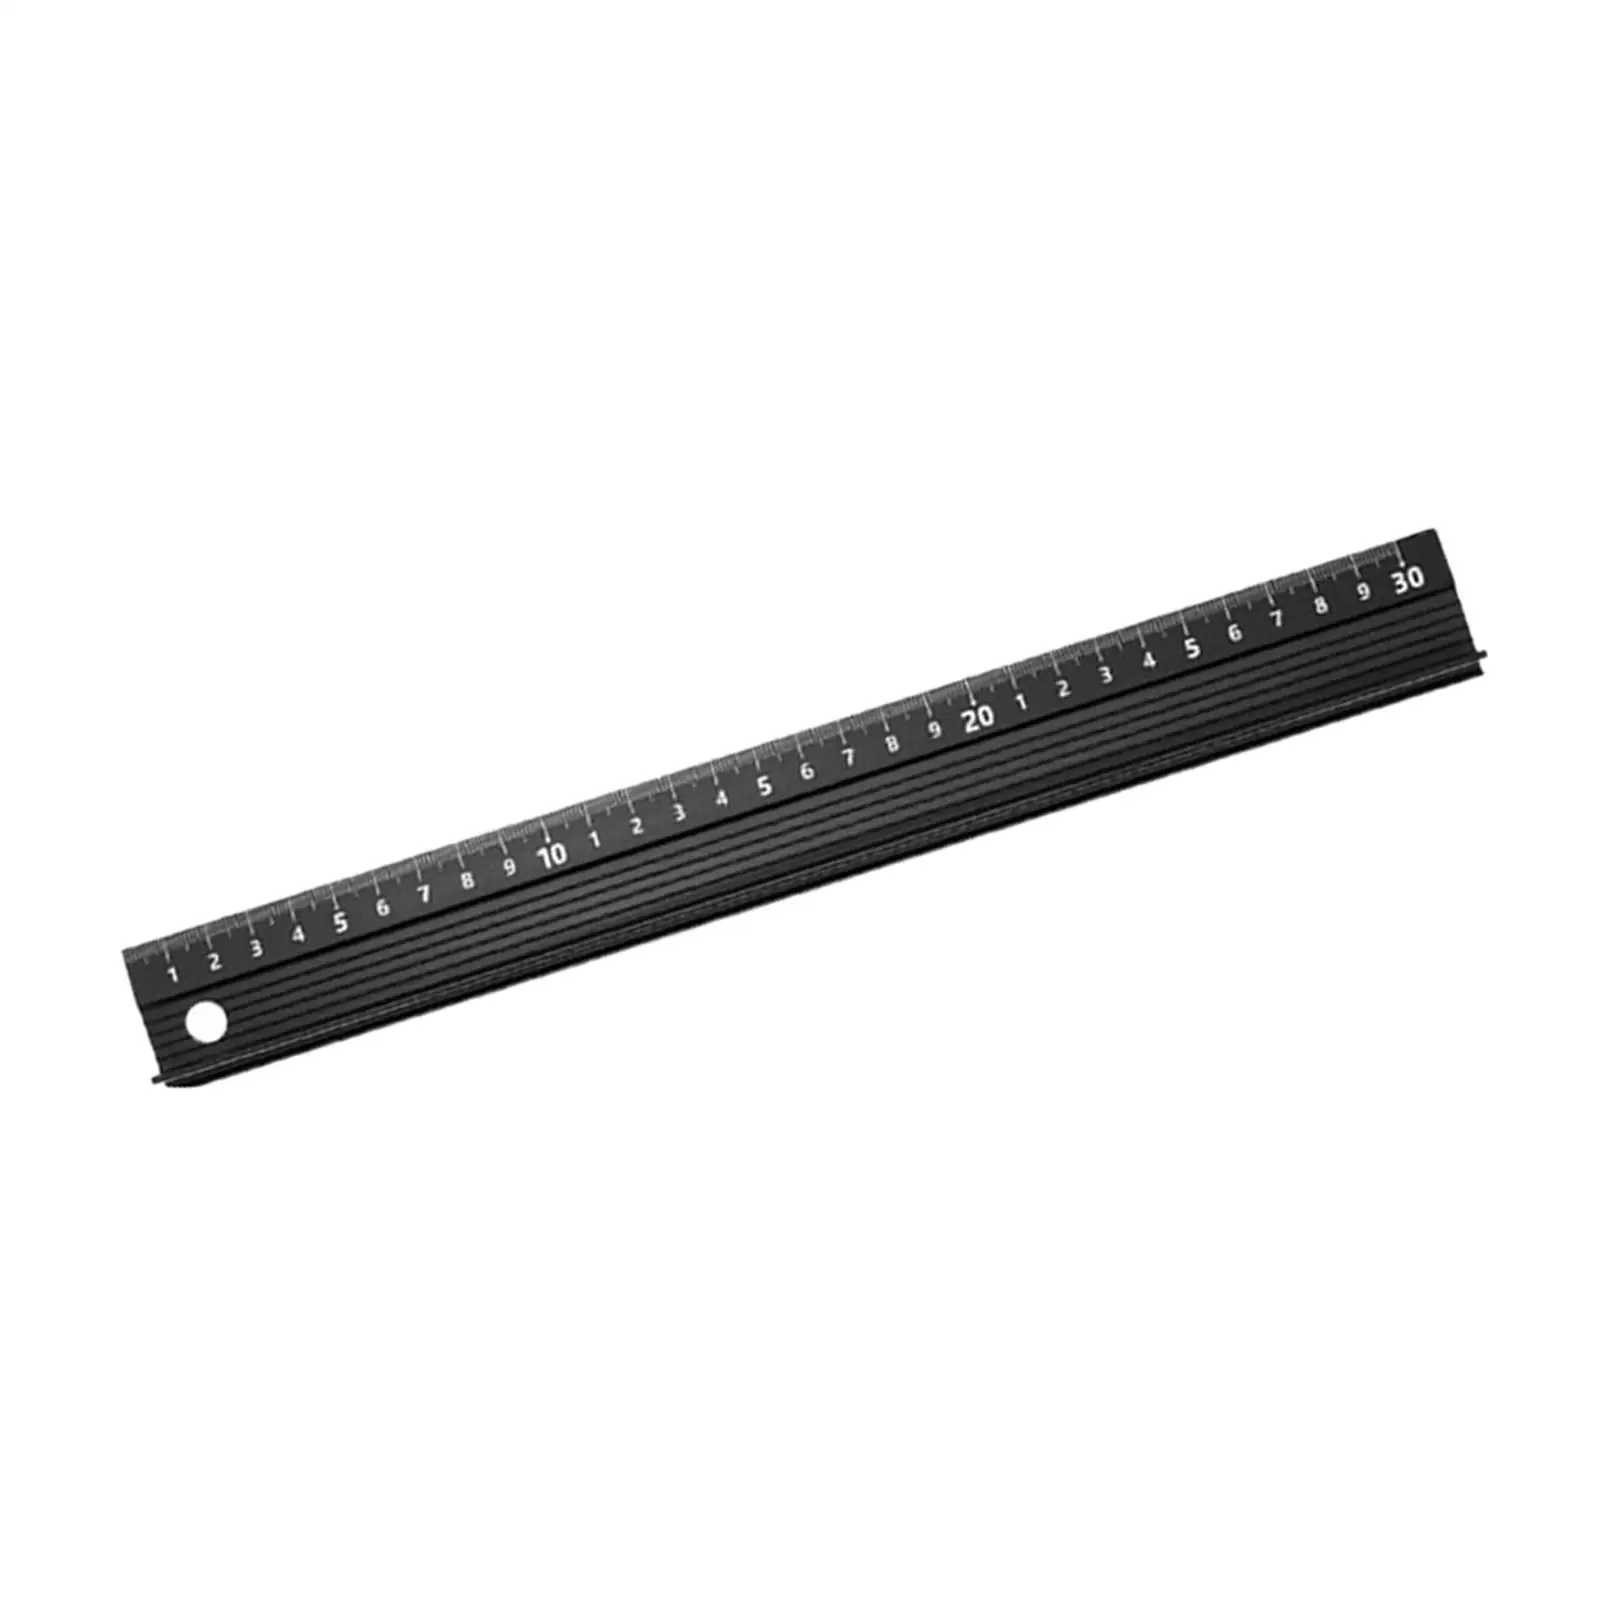 Cutting Ruler Handmade Metal Aluminum Alloy Leather Templates Leather Ruler Craft Safety Ruler Cutting Auxiliary Ruler